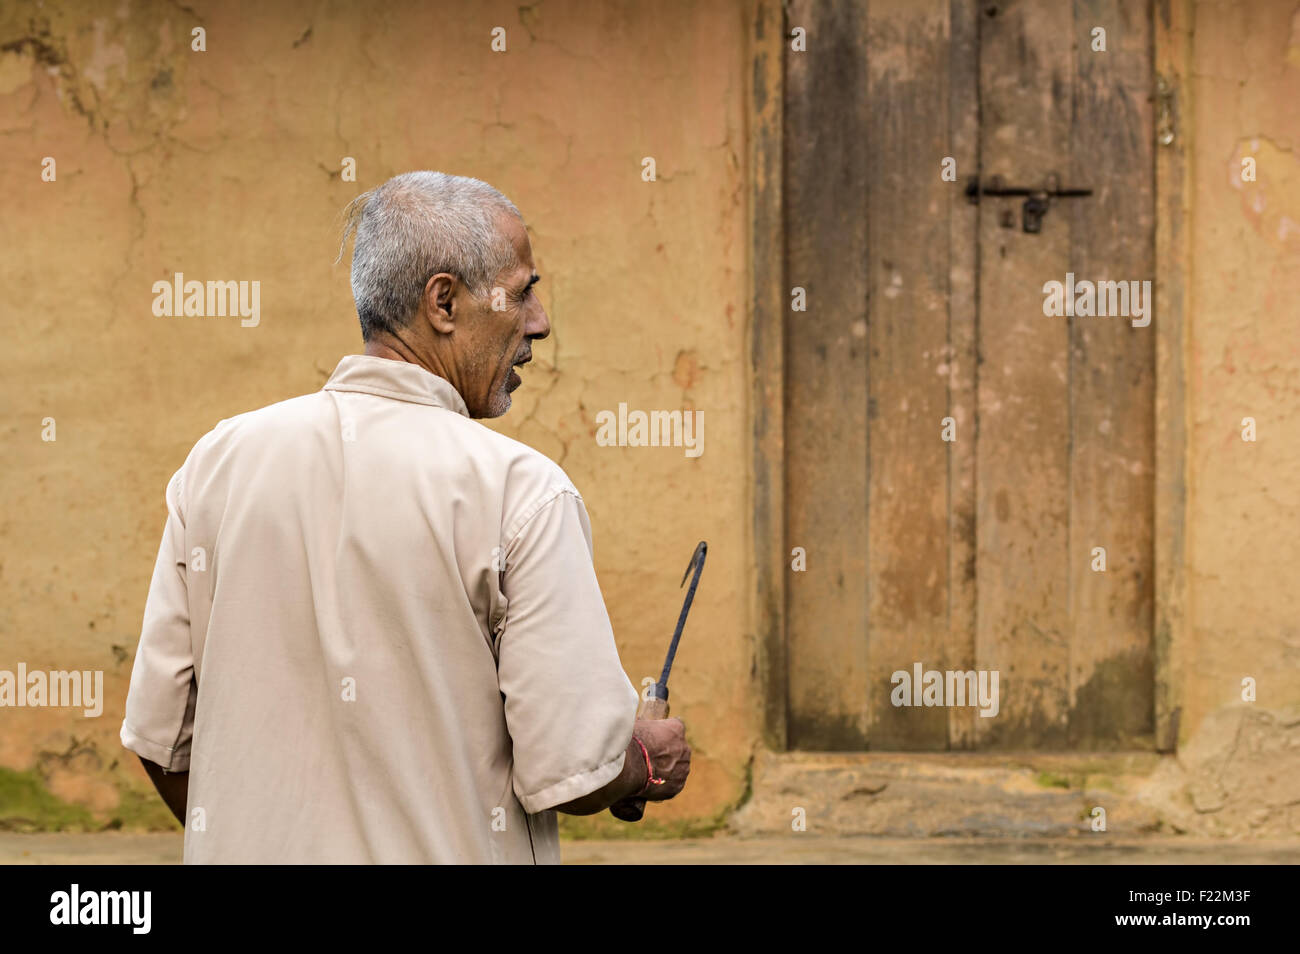 a candid portrait of a middle-aged Nepalese farmer man with a large pruning knife against a old wall and door background Stock Photo